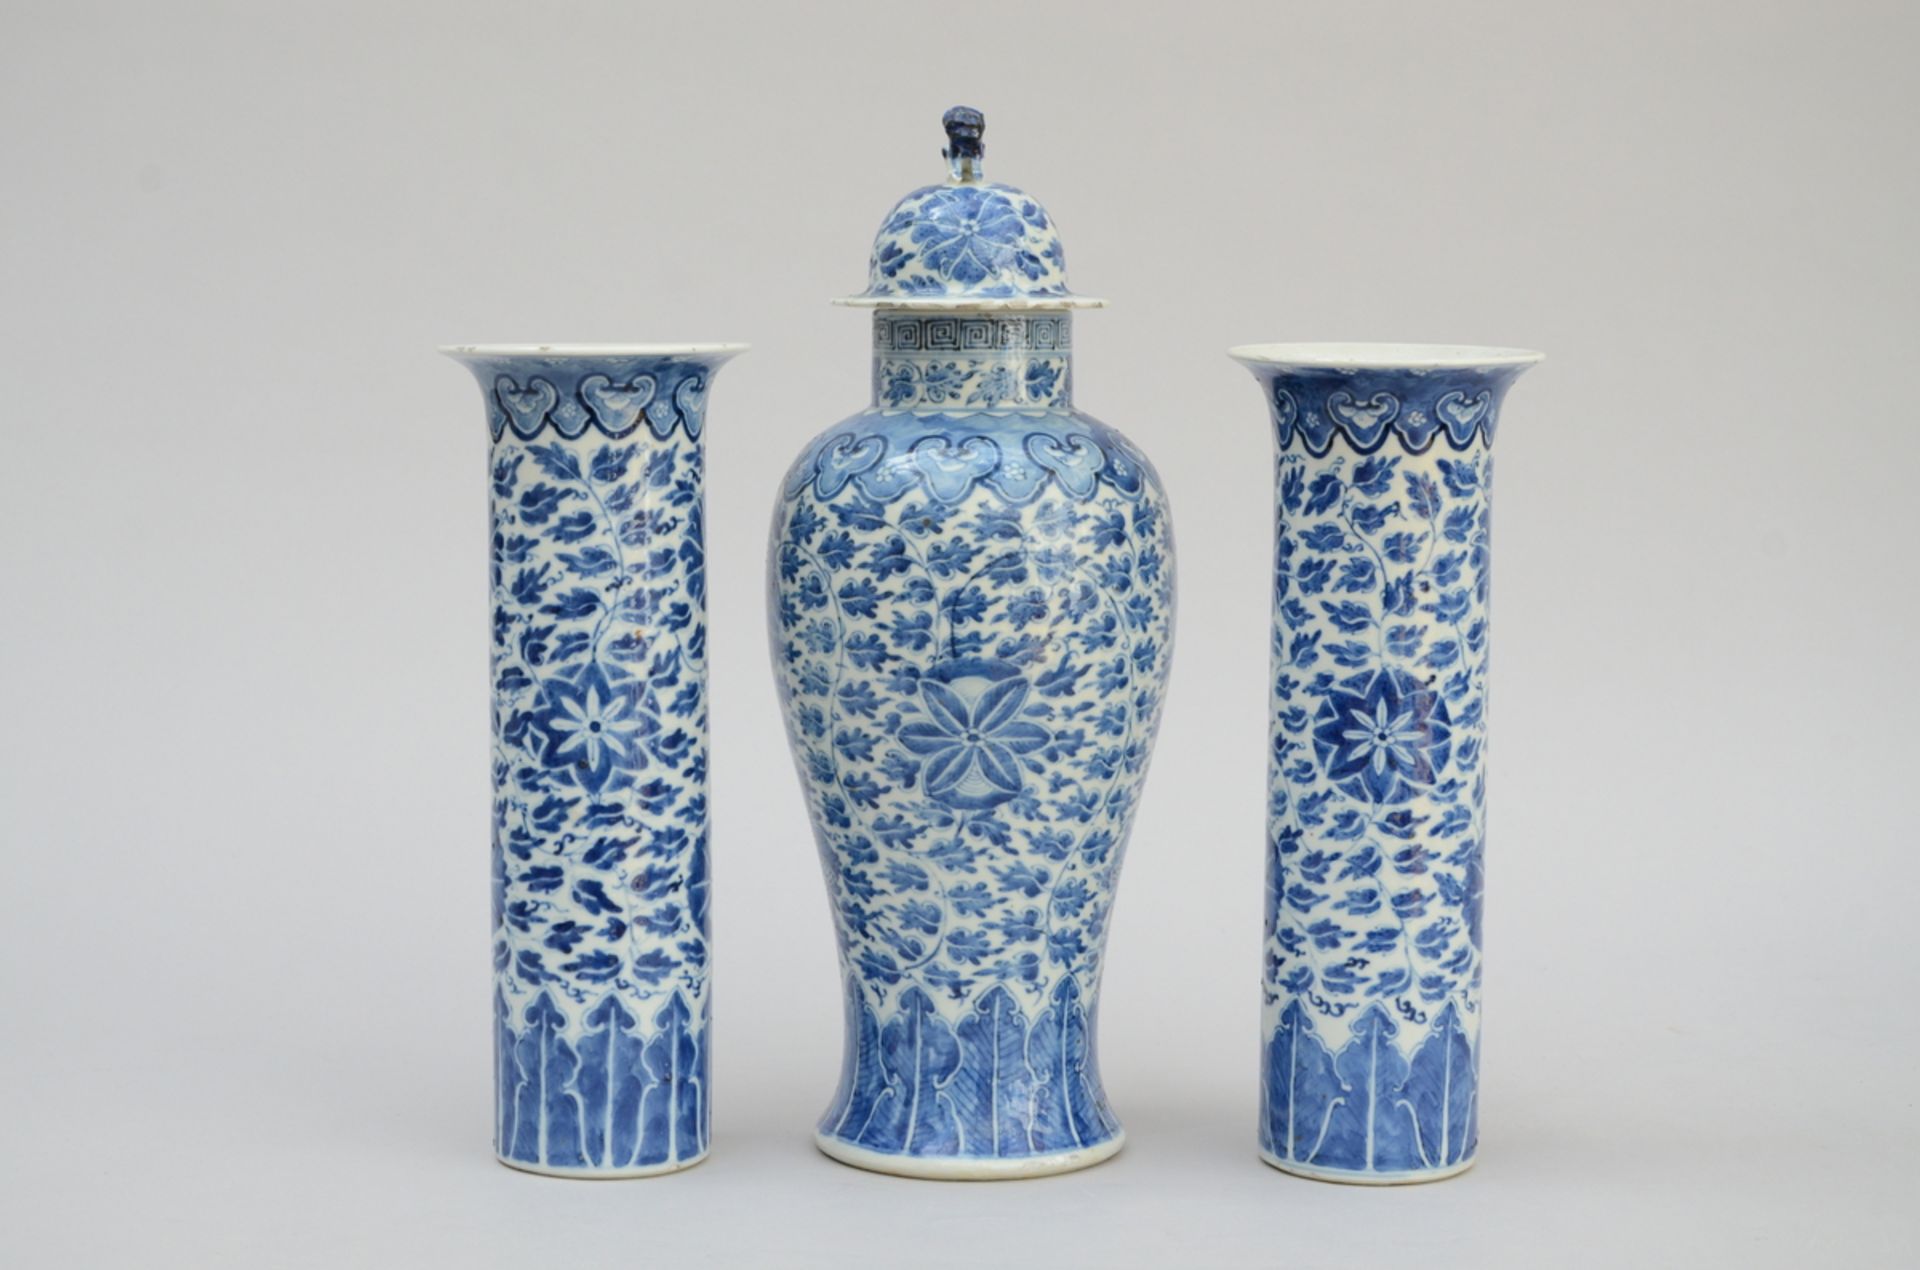 Three vases in Chinese blue and white porcelain, 19th century (h40cm and h30cm) (*) - Image 2 of 5